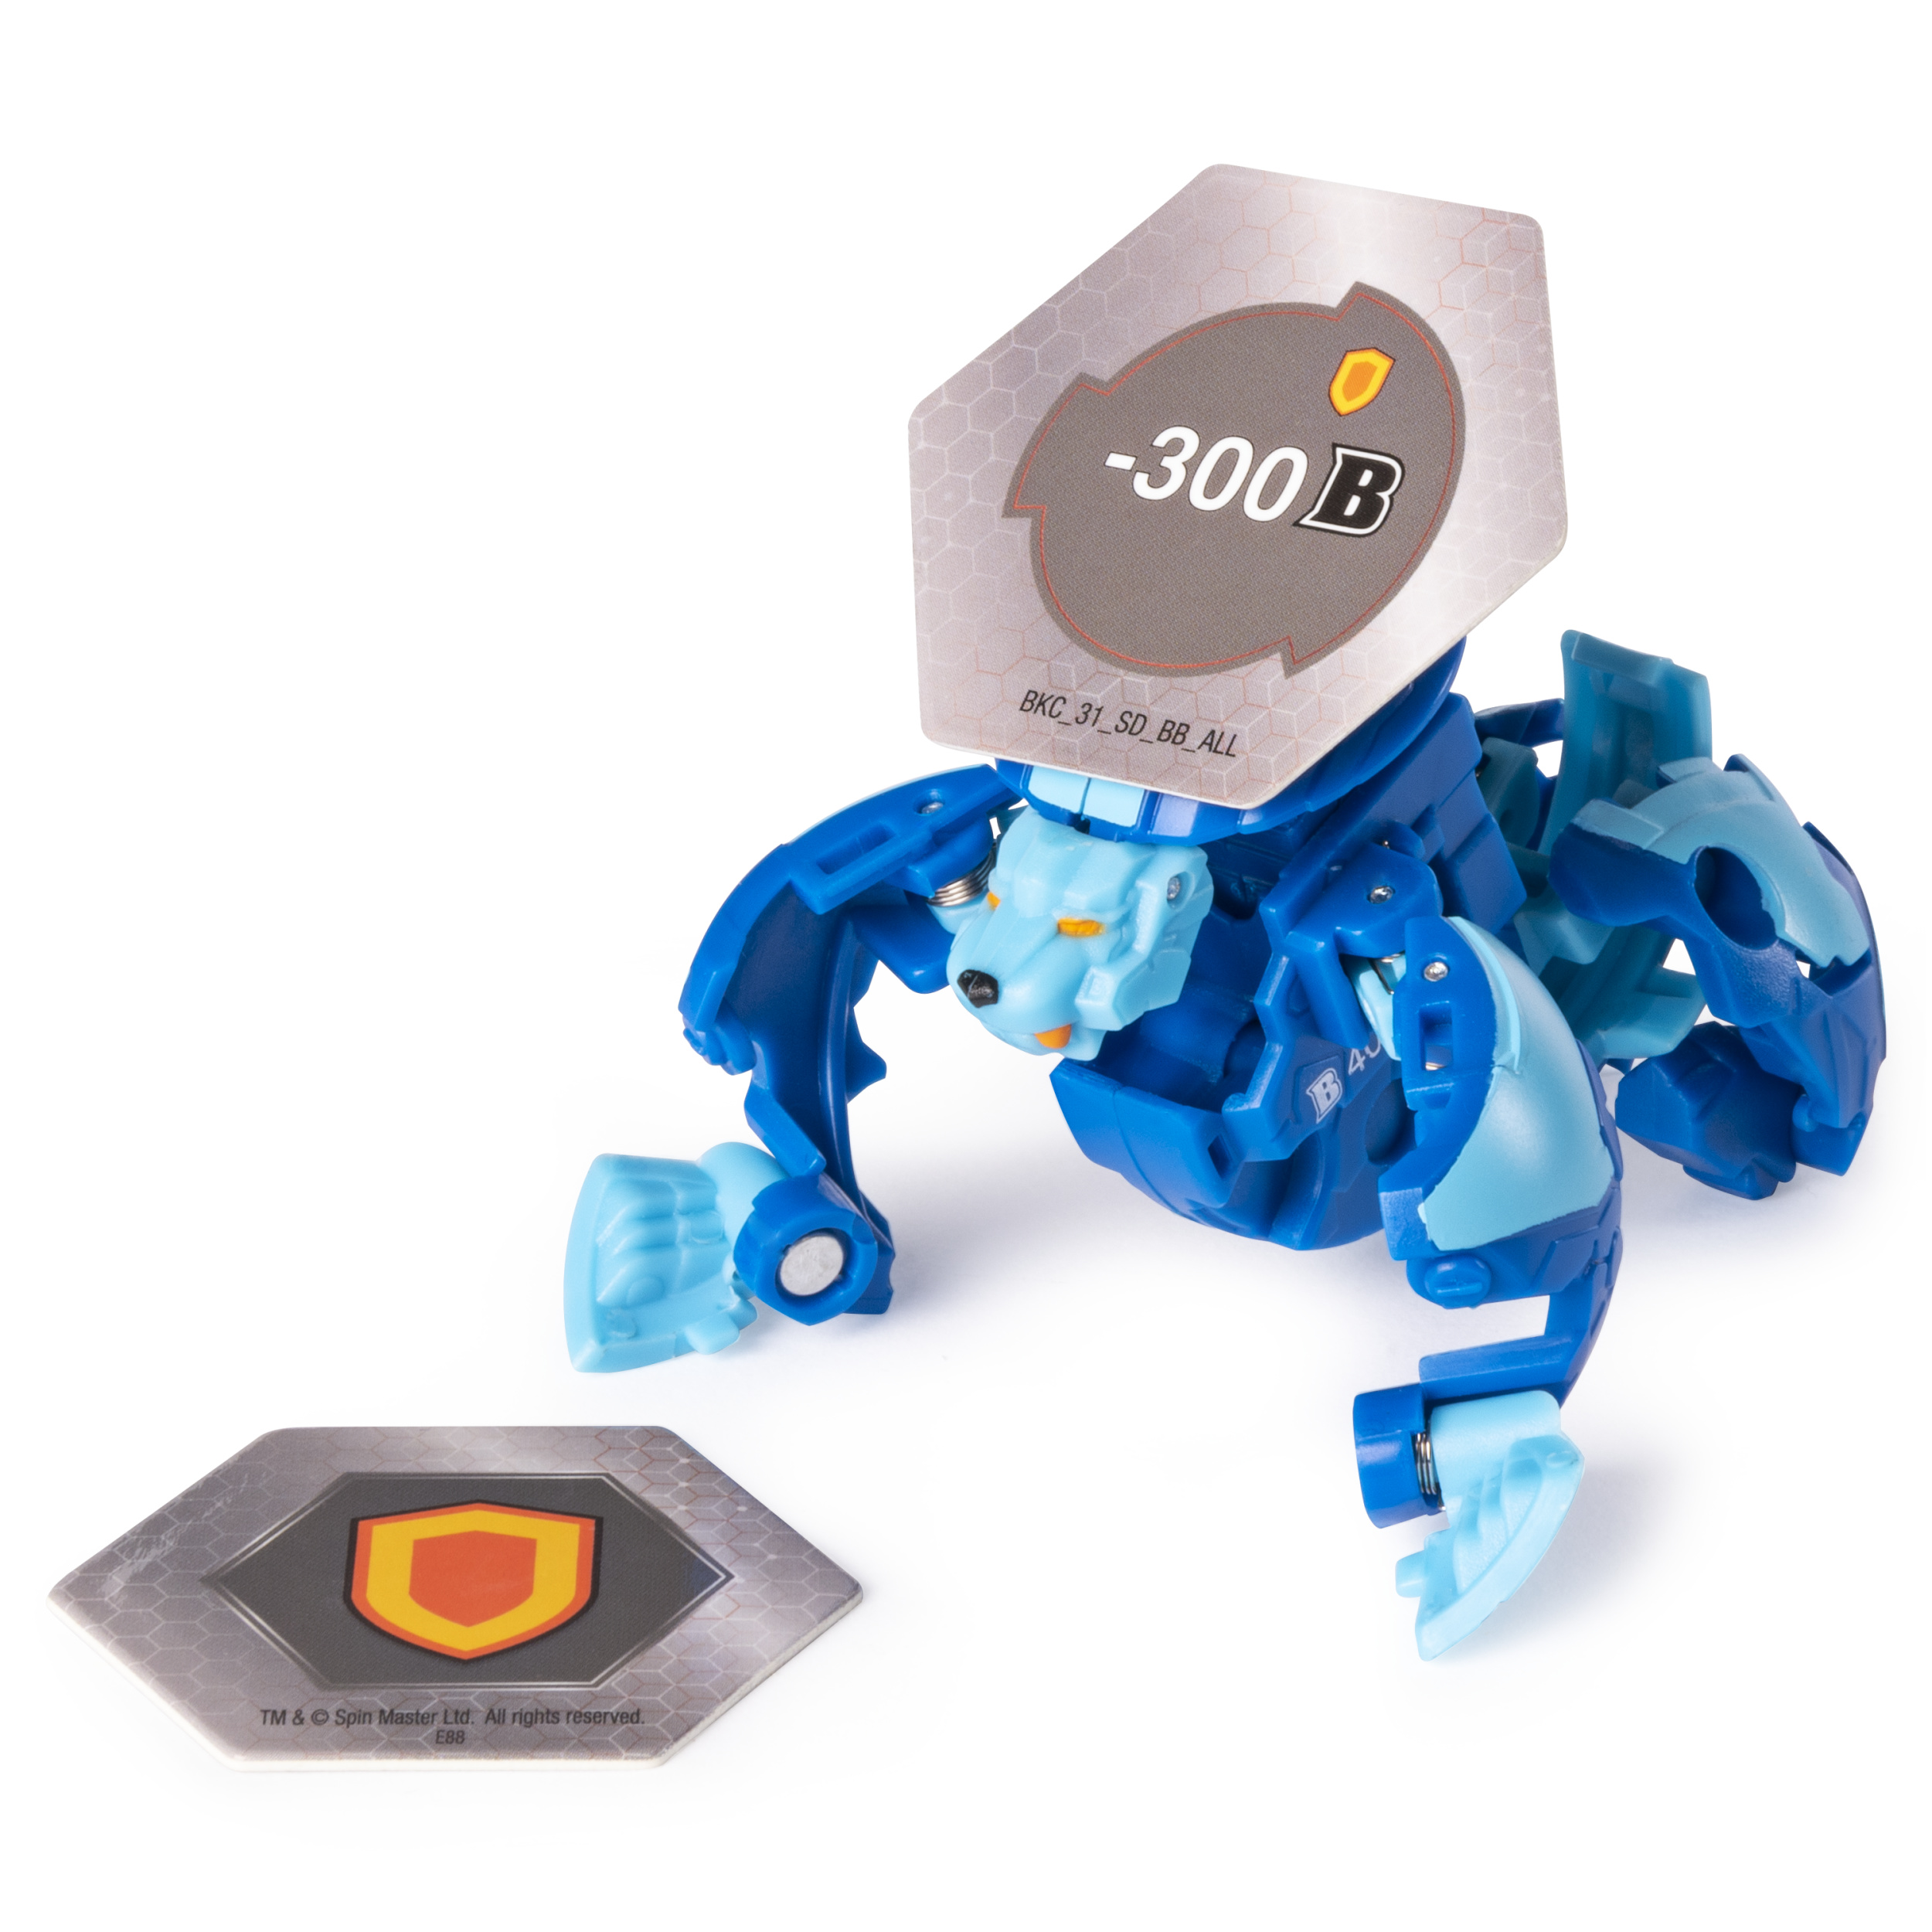 Bakugan Ultra, Hydorous, 3-inch Collectible Action Figure and Trading Card, for Ages 6 and up - image 4 of 5